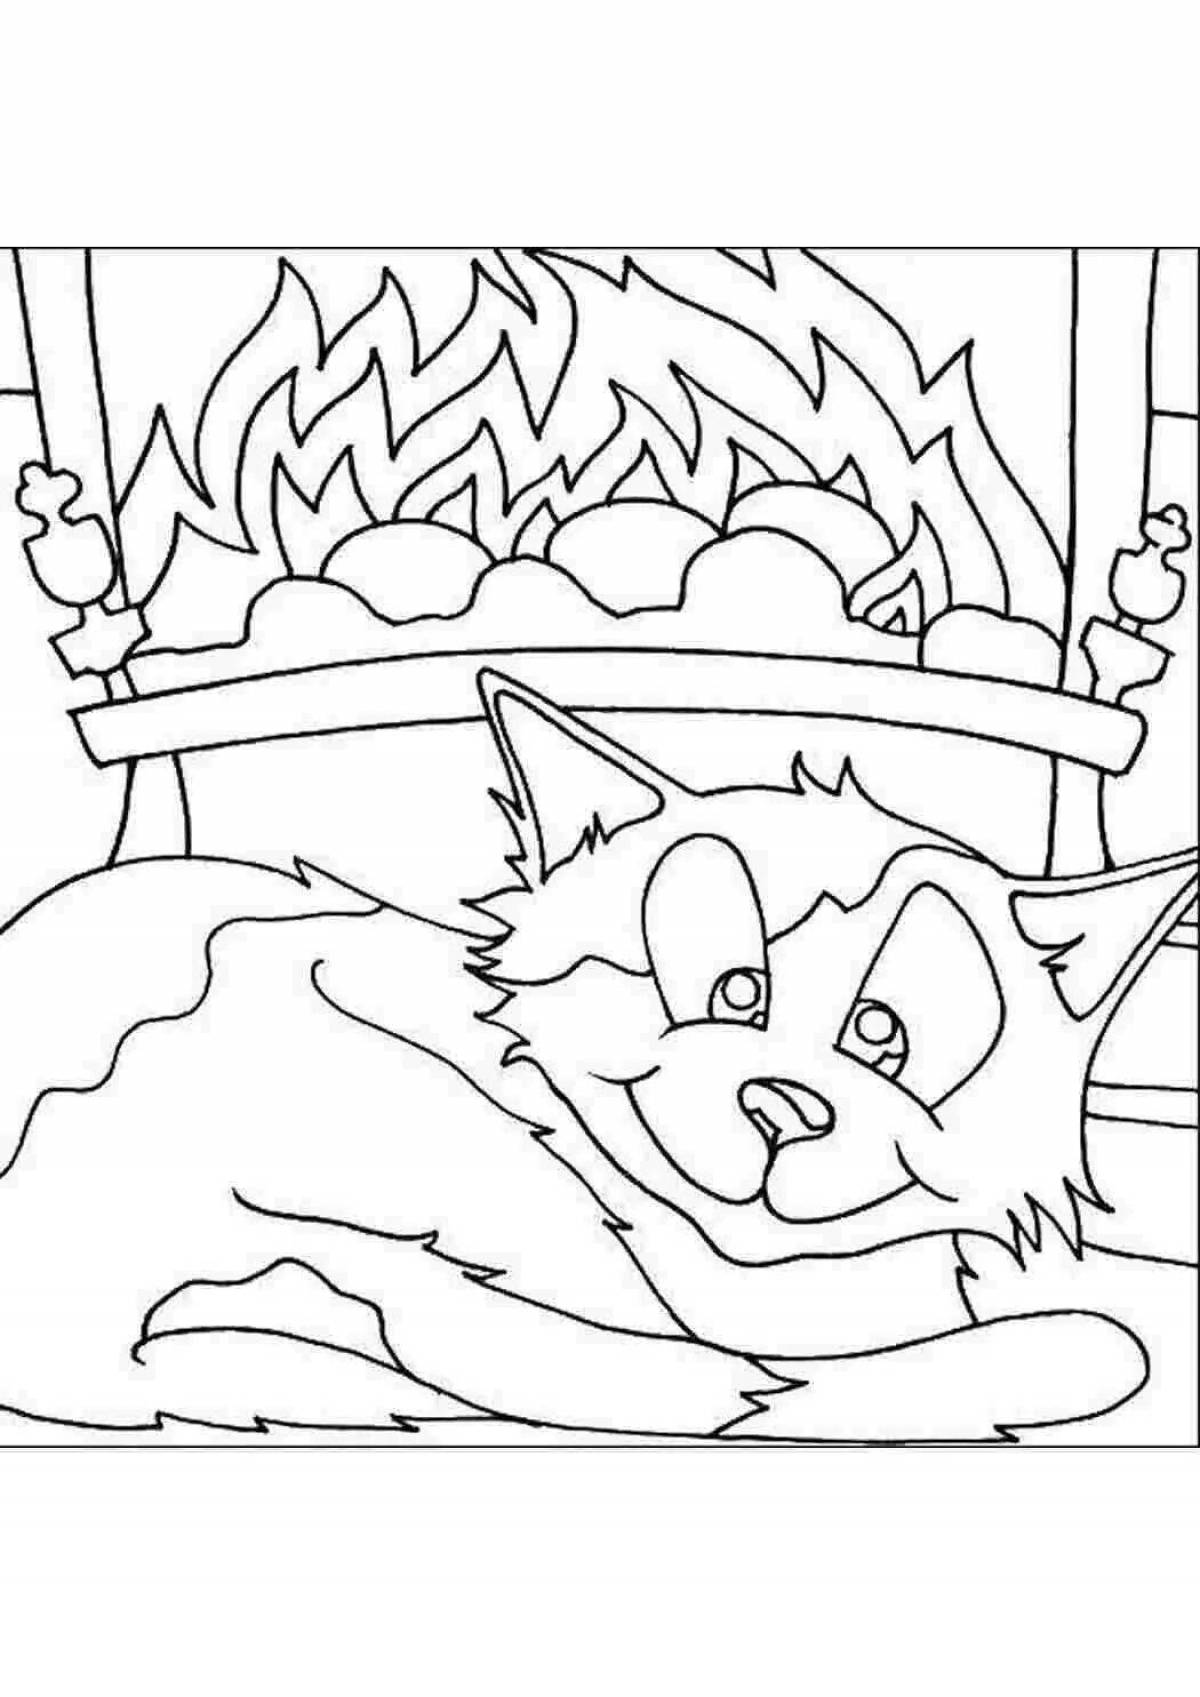 Crazy fiery friend coloring page